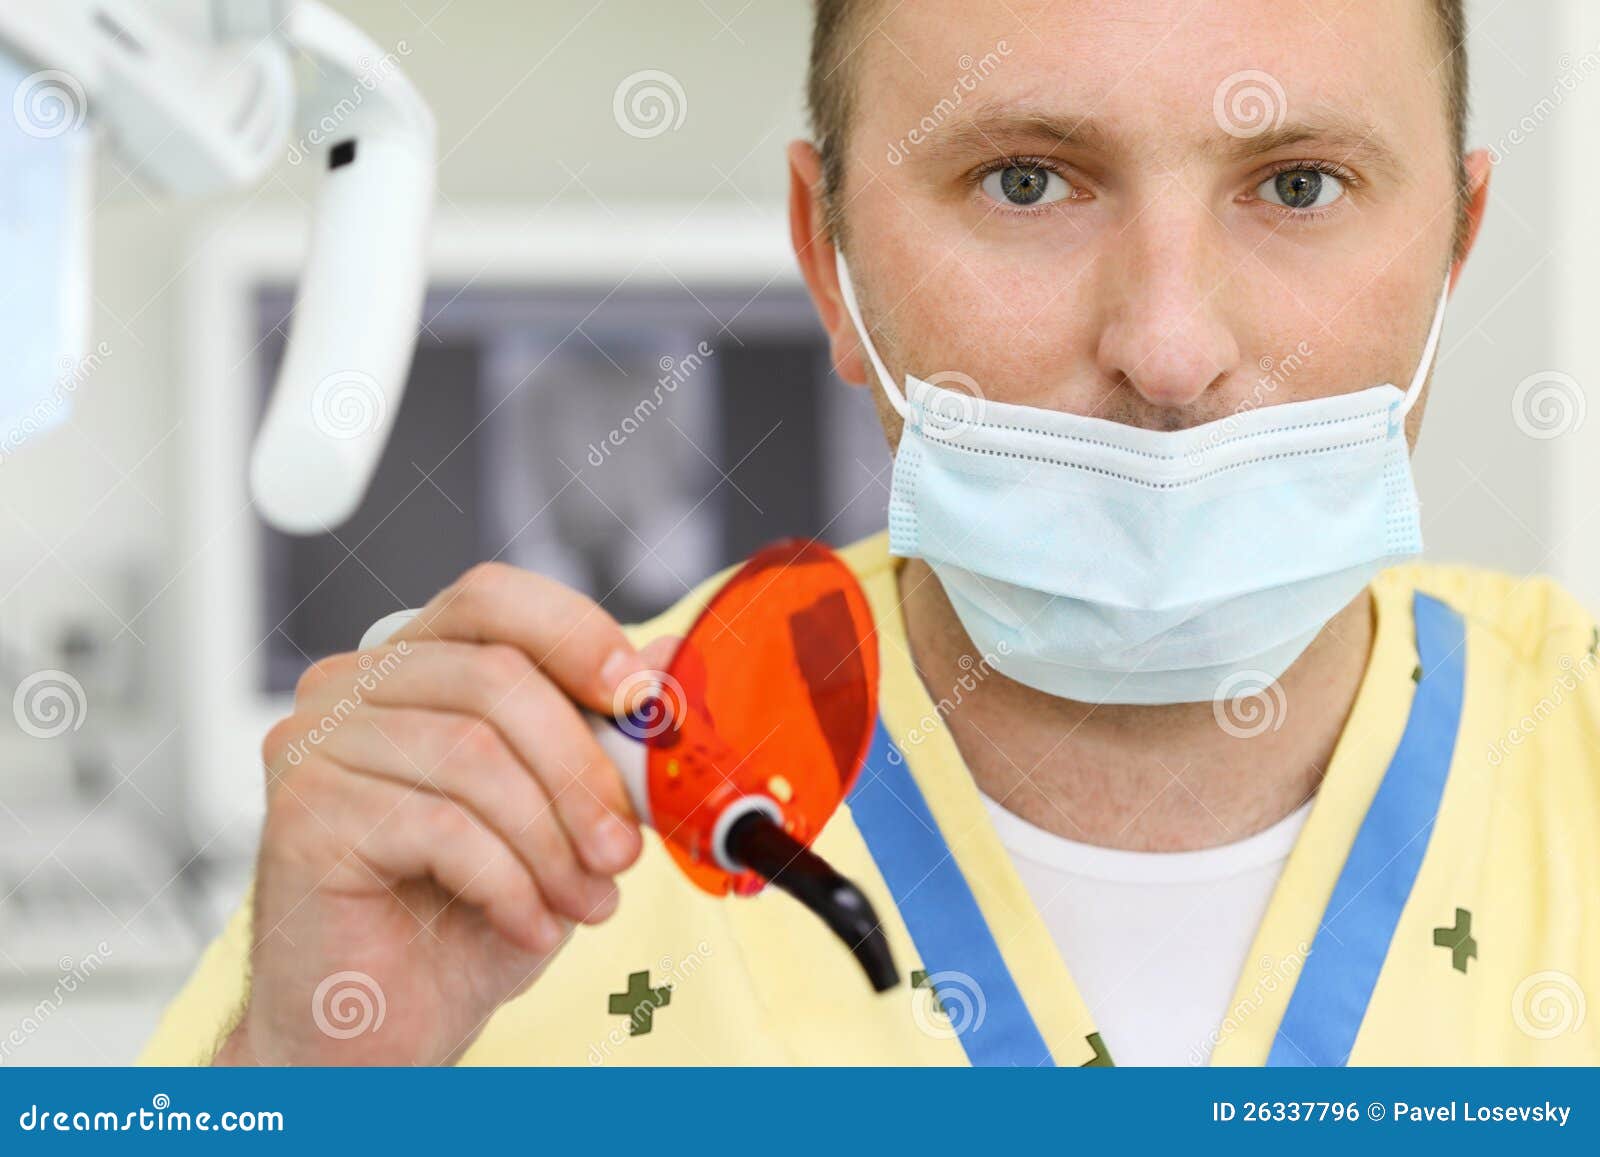 dentist in mask with ultraviolet curing light tool